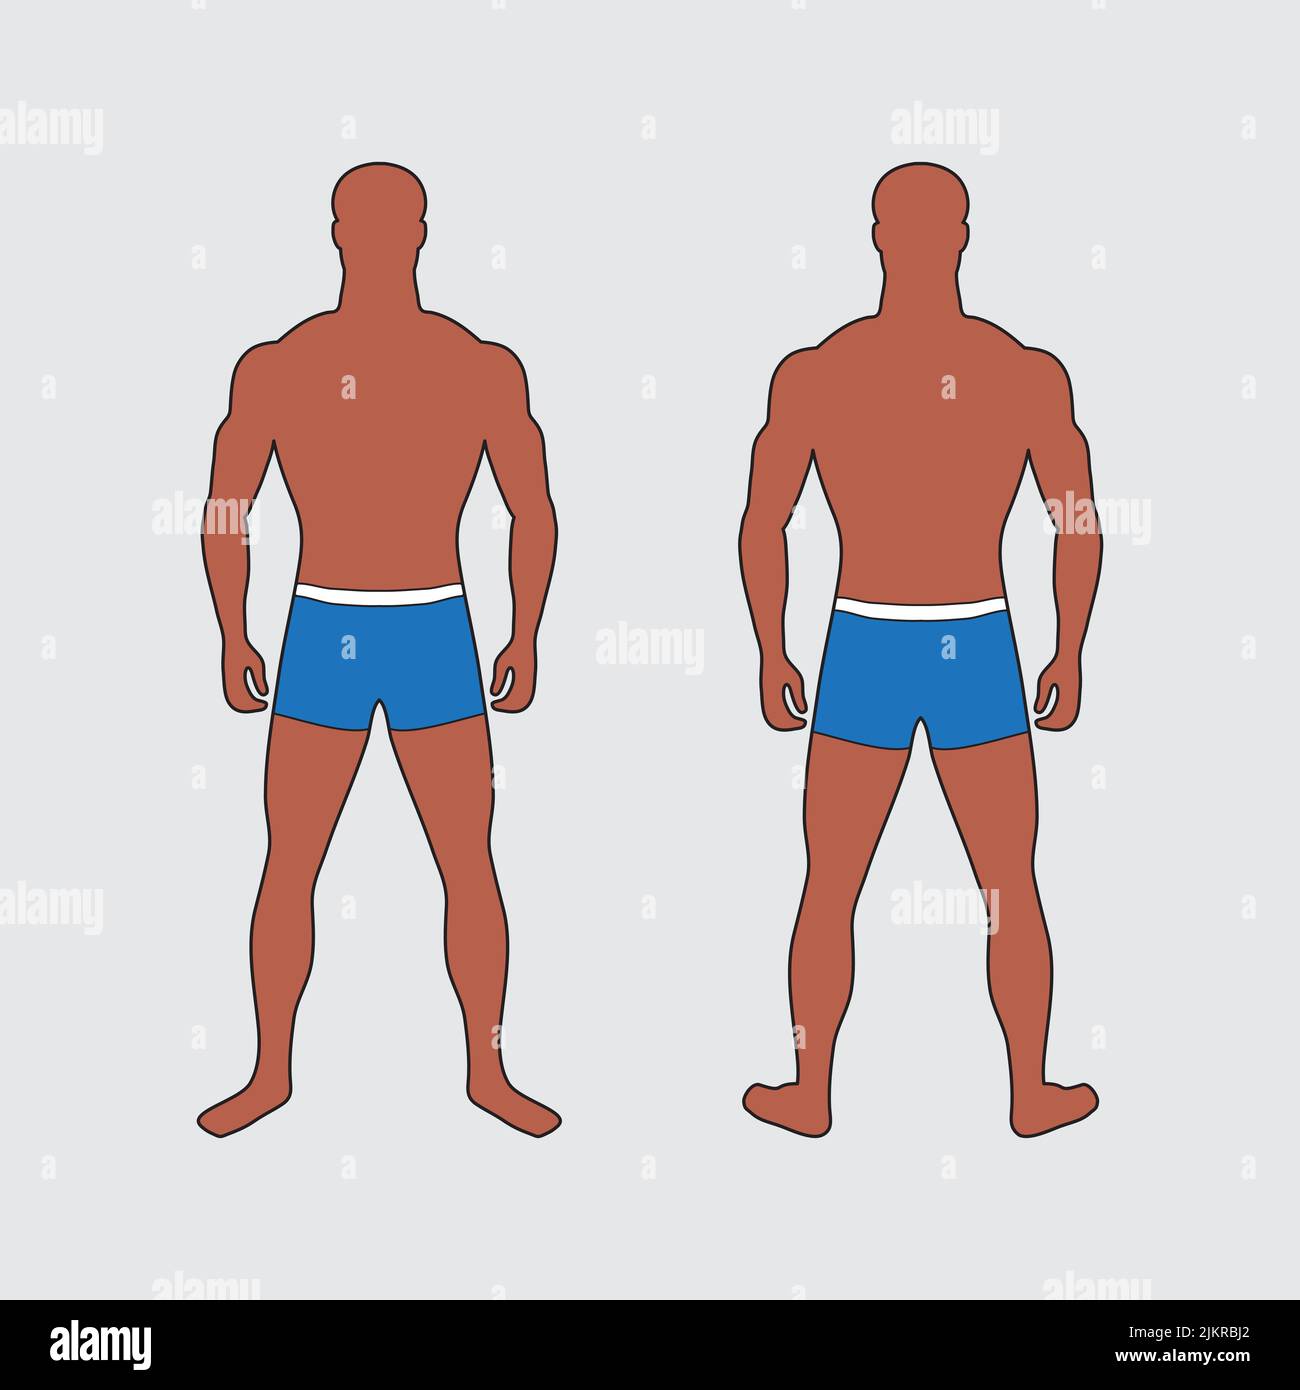 Adult muscular man. Impersonal character in blue swimming trunks. Front and back view. Standard male figure. Correct physique and body proportions. Sl Stock Vector